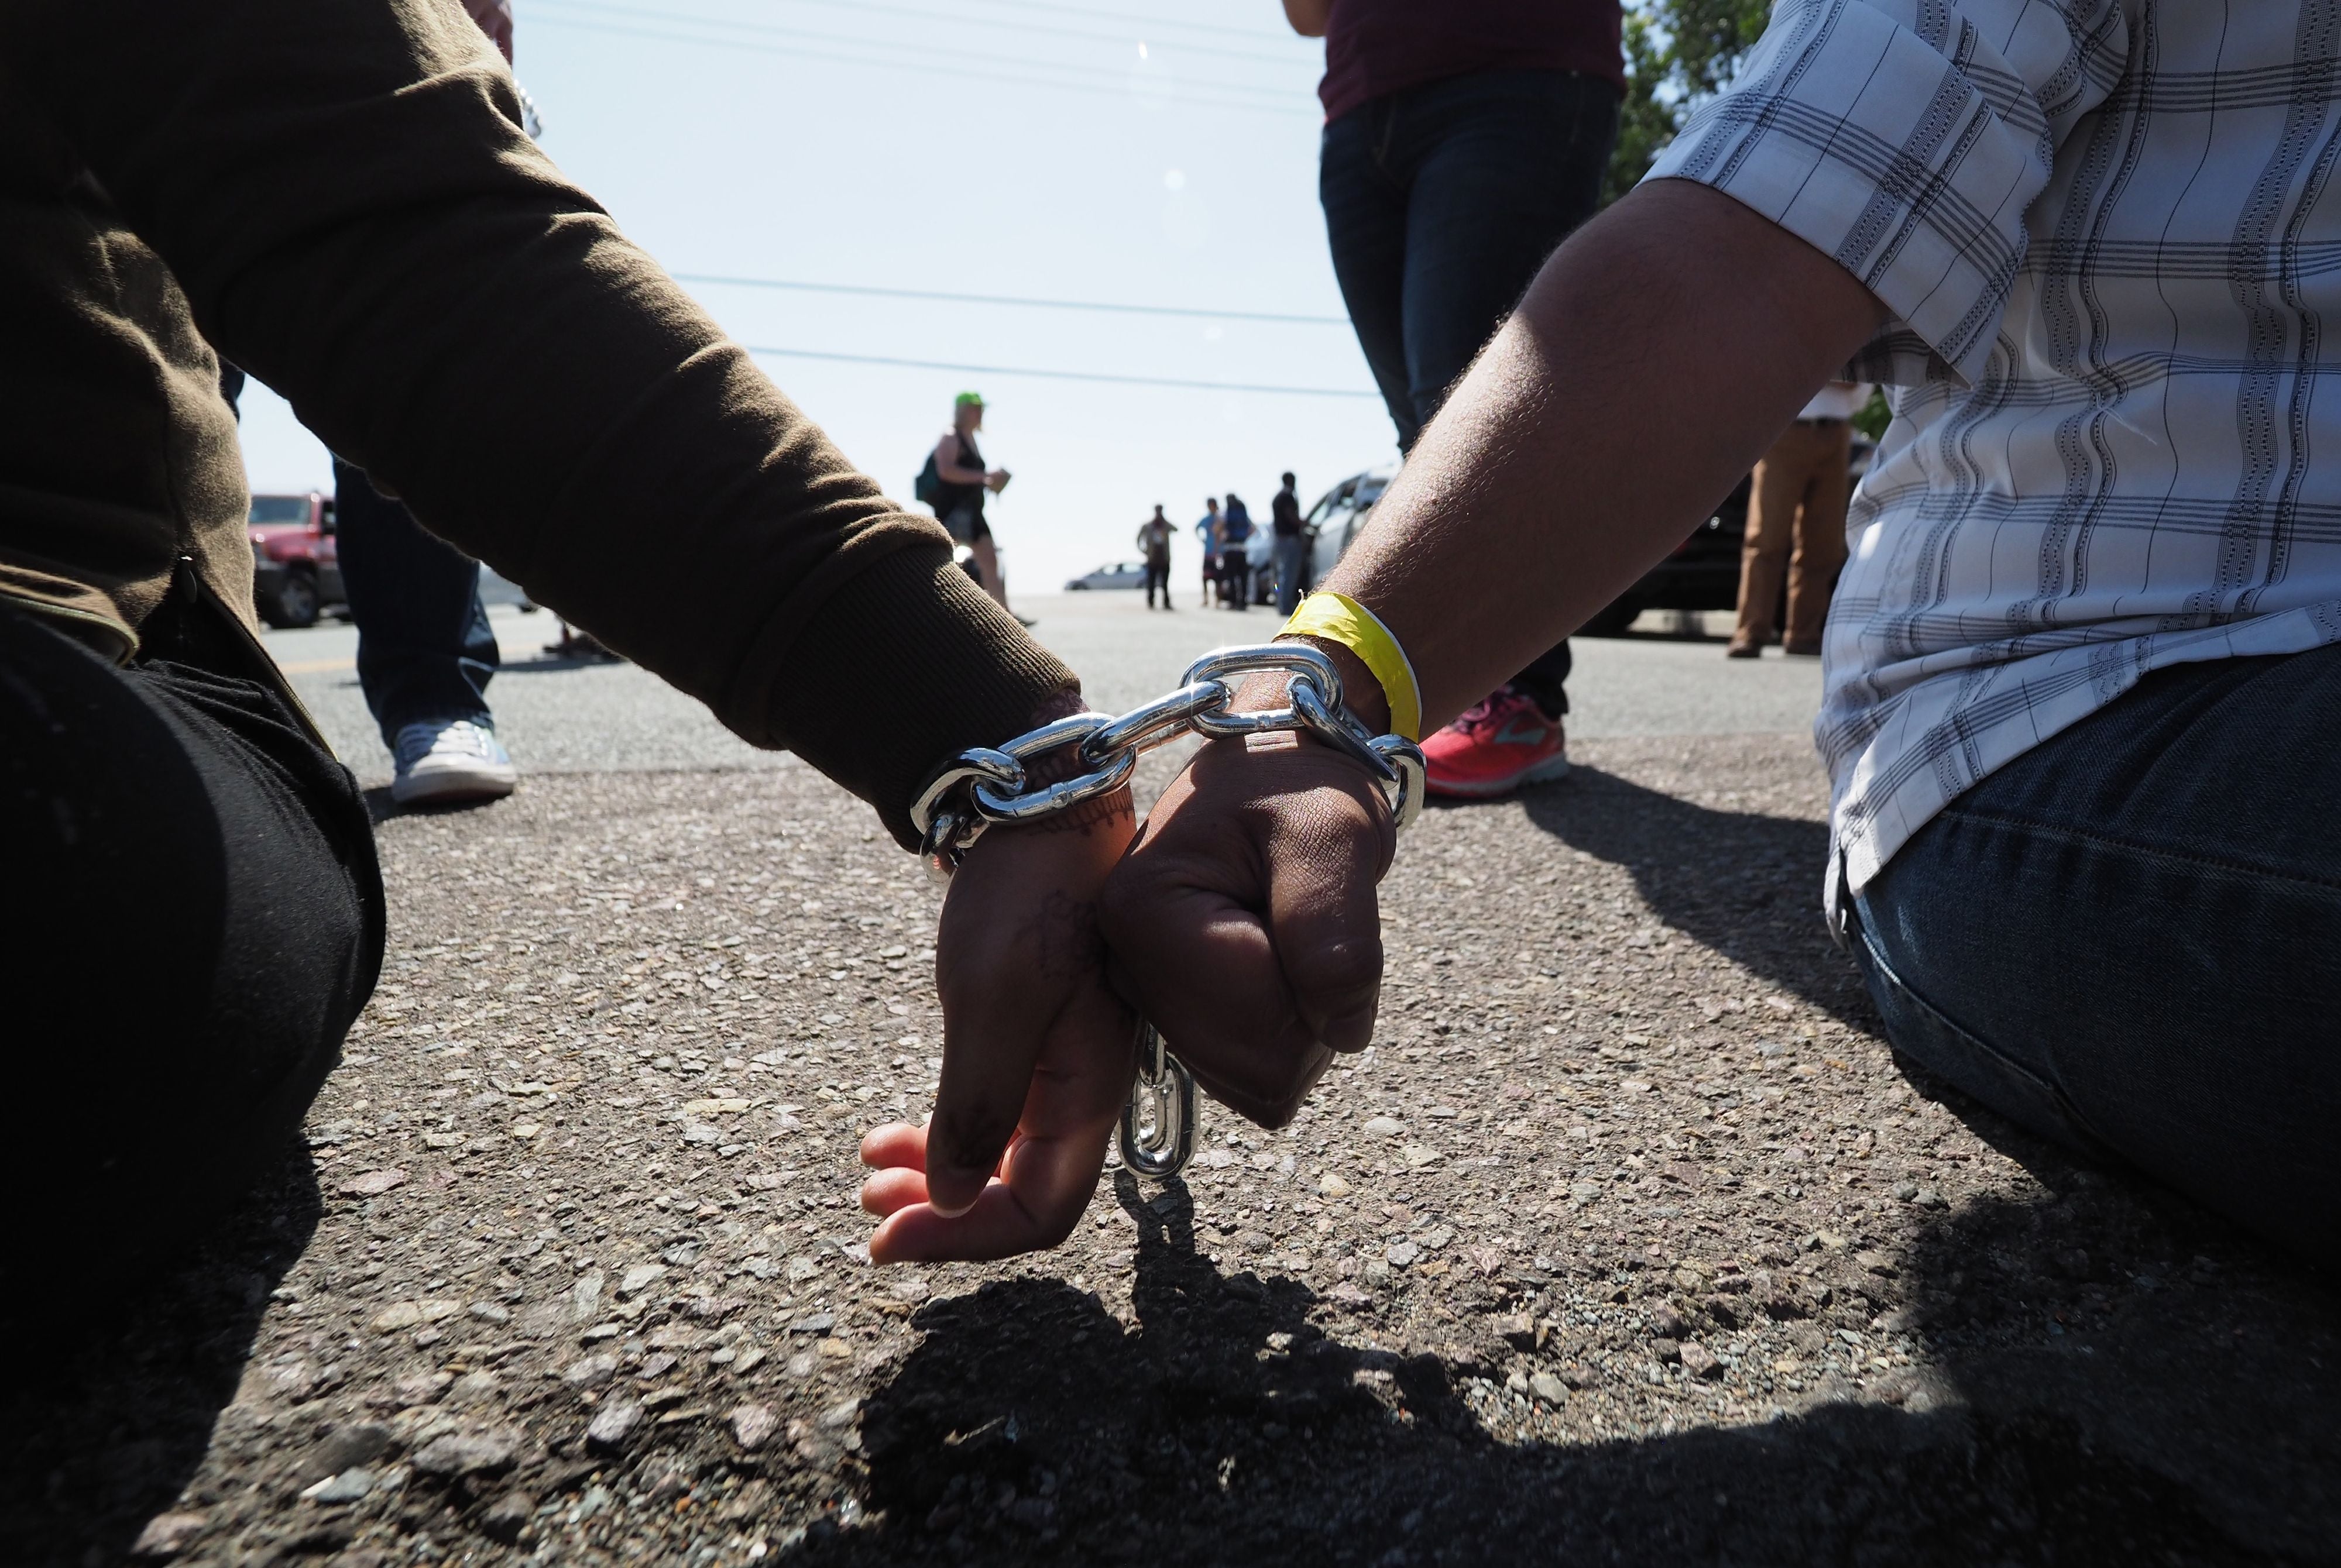 Protestors chained together at the wrist block traffic from passing on the road to the Otay Mesa Detention Center during a demonstration against US immigration policy that separates children from parents, in San Diego, California June 23, 2018